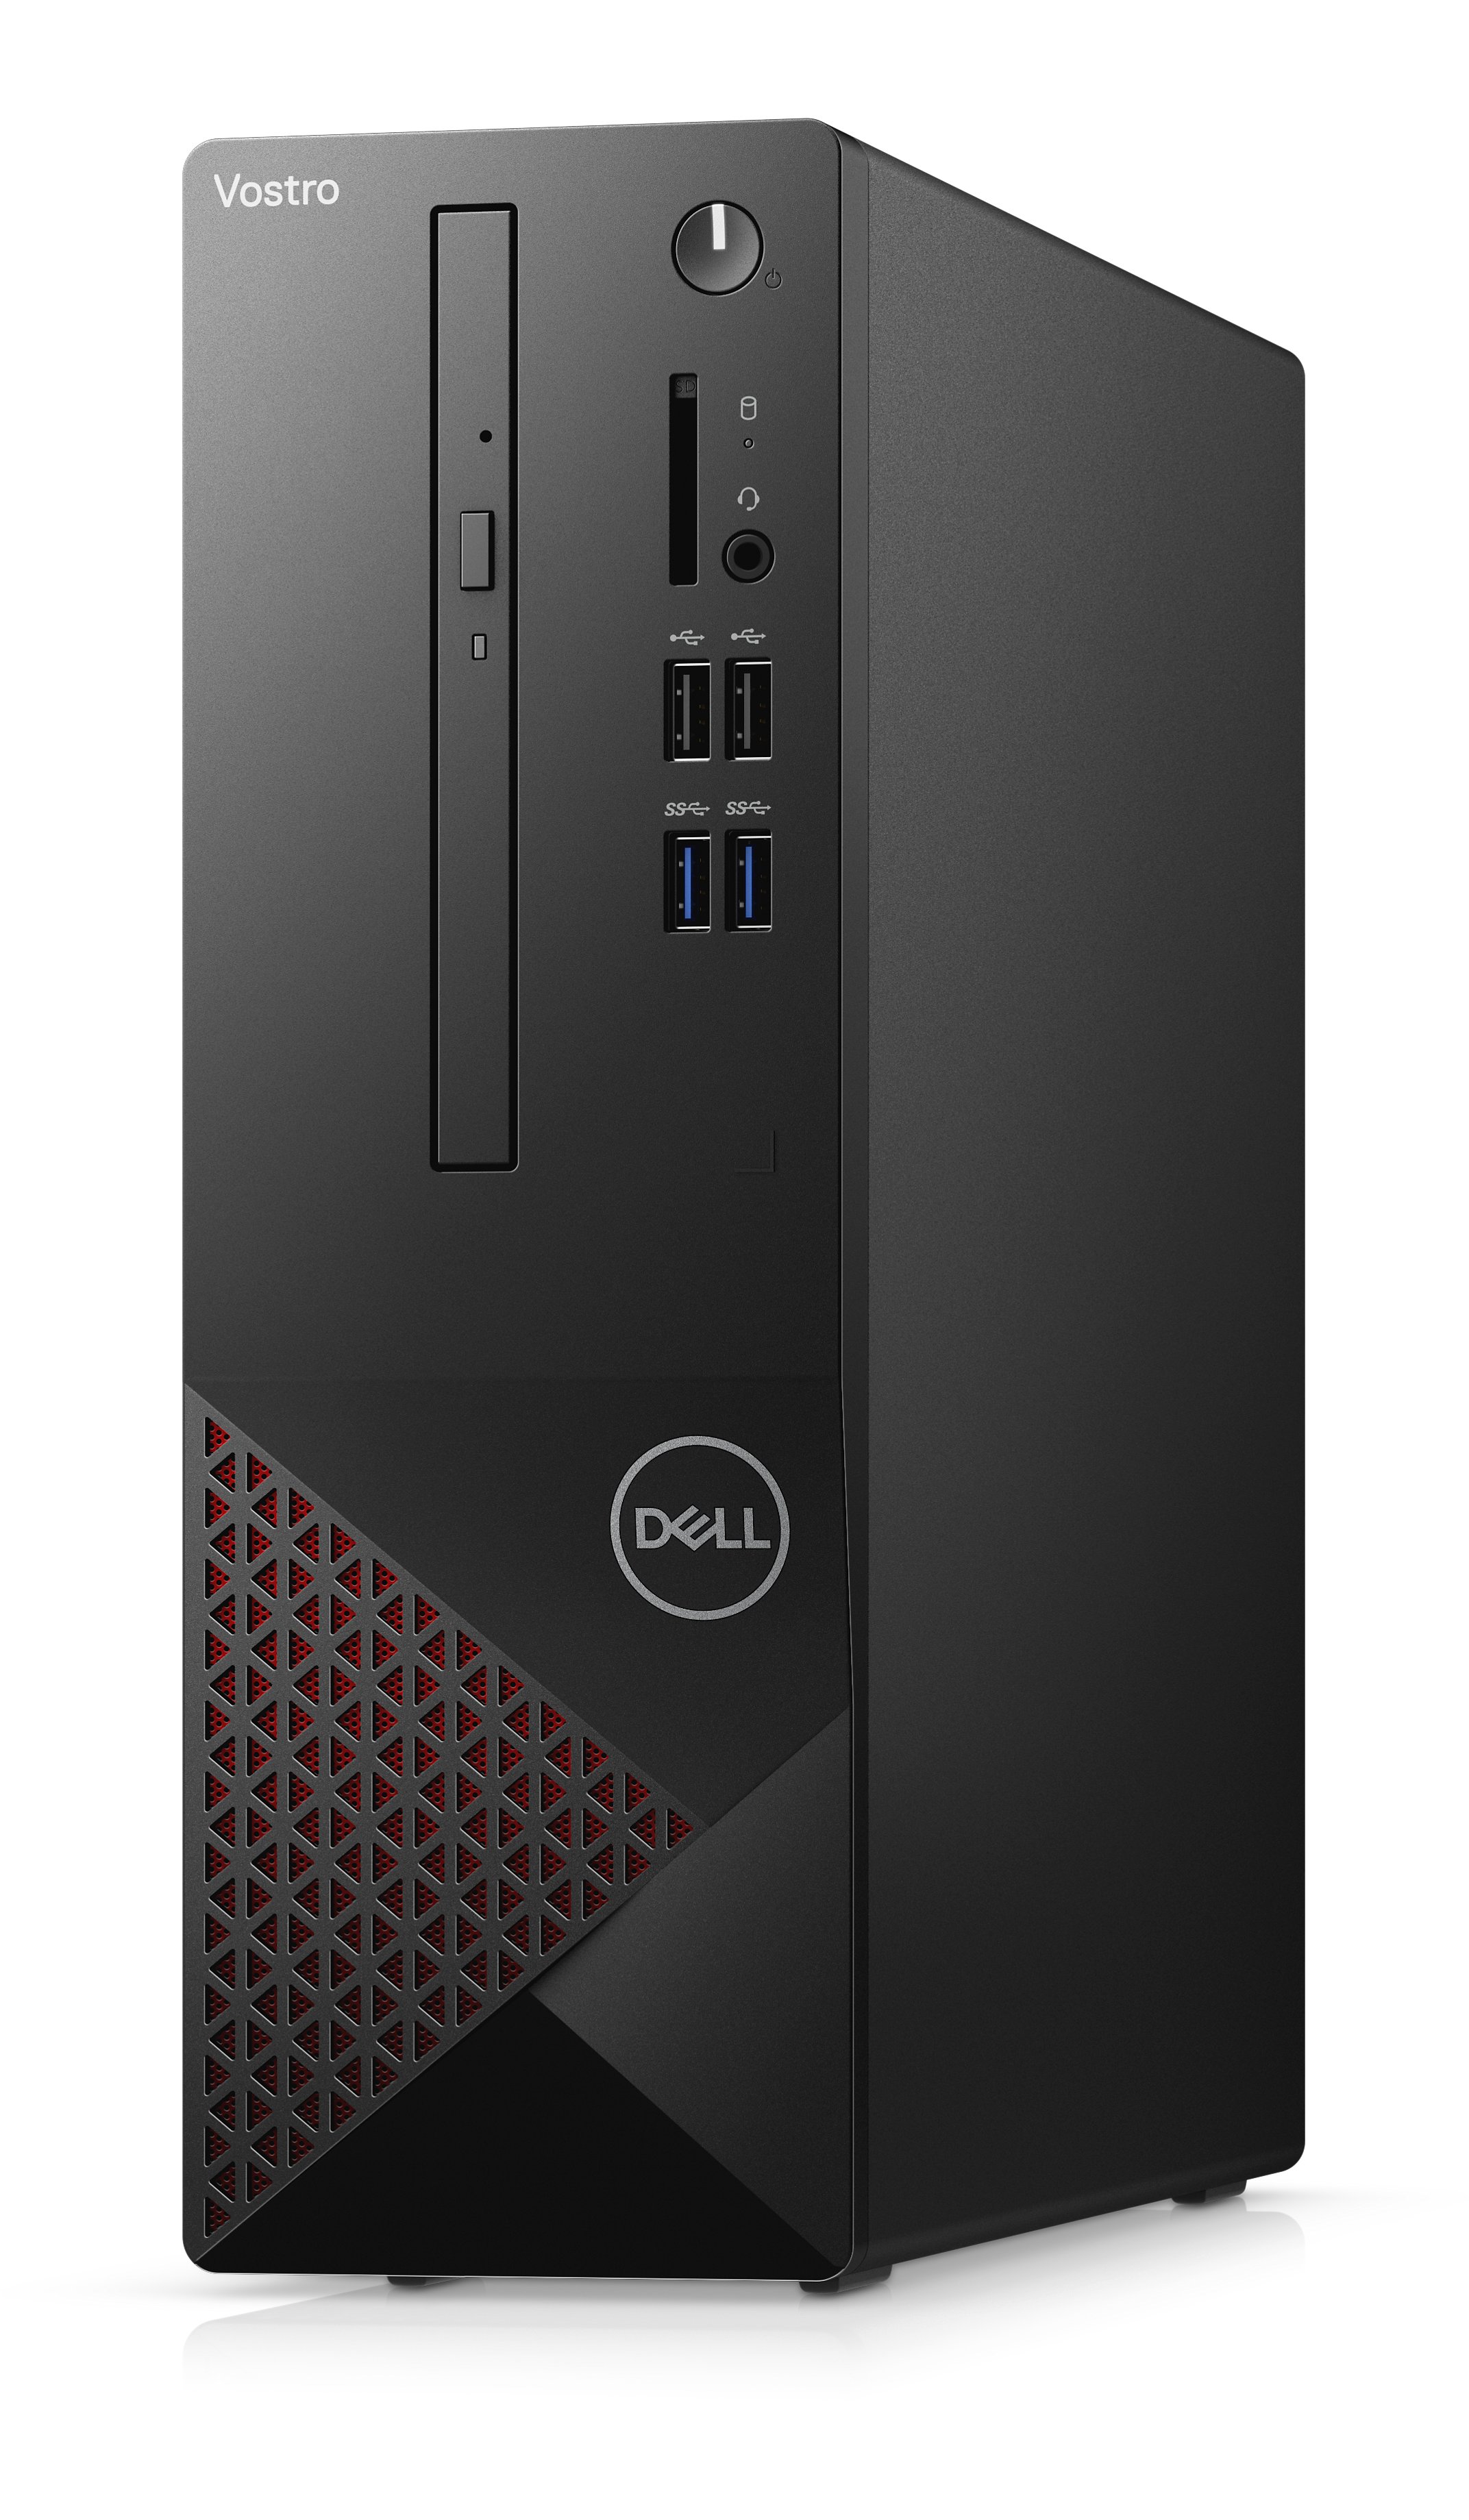 PC Dell Vostro 3681 70226496 Intel Core i5-10400(2.90 GHz,12 MB),8GB RAM,1TB HDD,DVDRW,WL+BT,Mouse,Keyboard,Win 10 Home,McAfeeMDS,1Yr